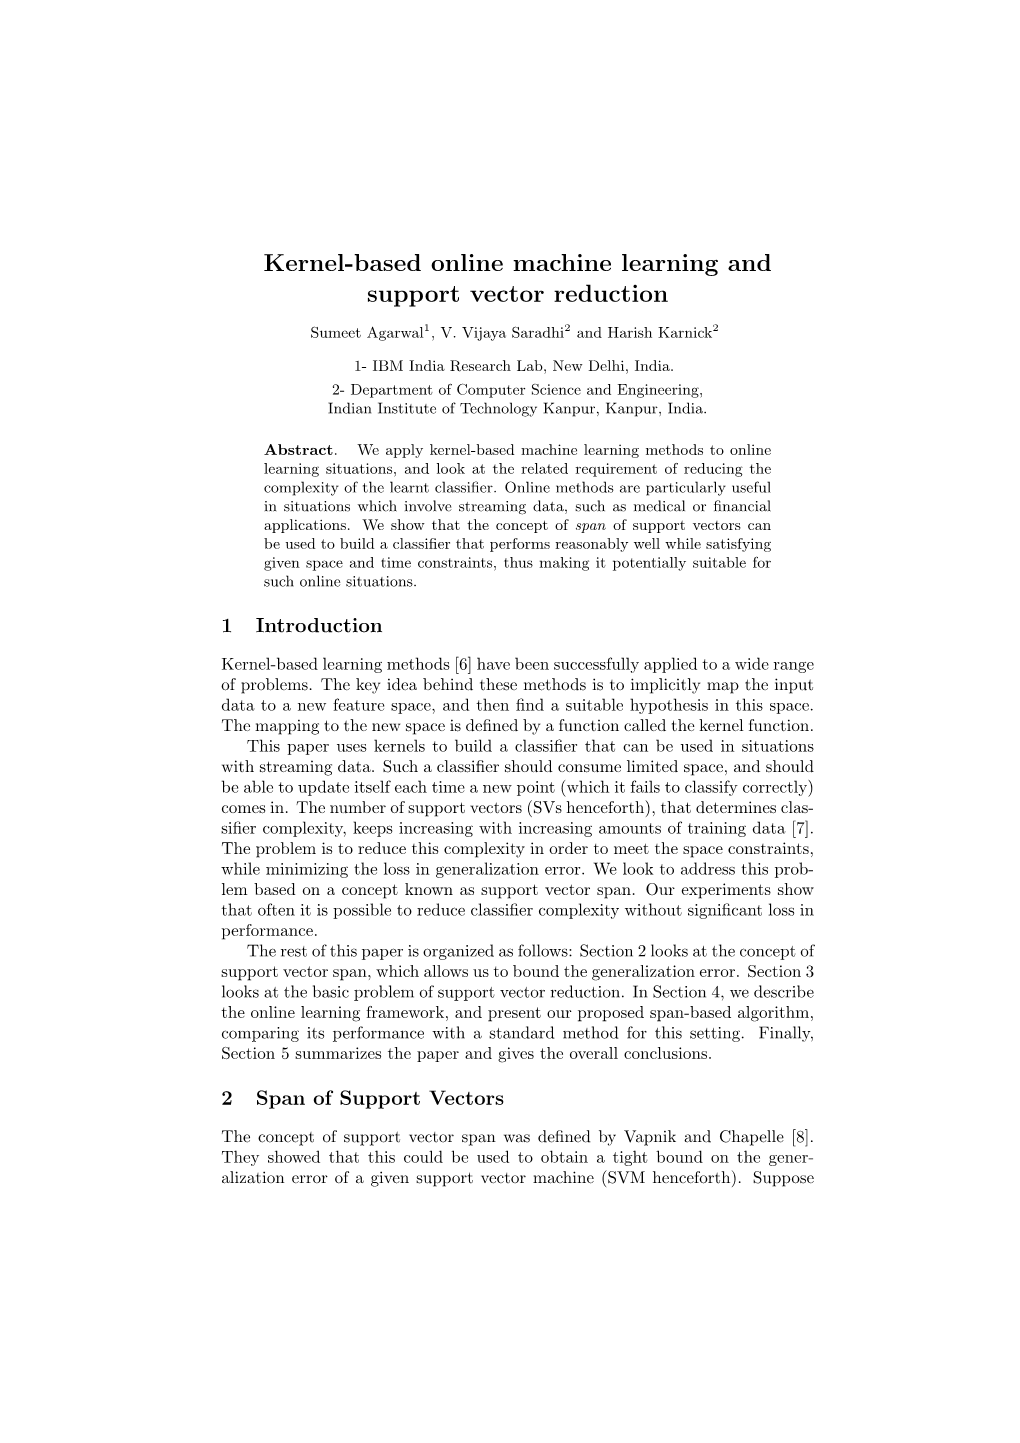 Kernel-Based Online Machine Learning and Support Vector Reduction